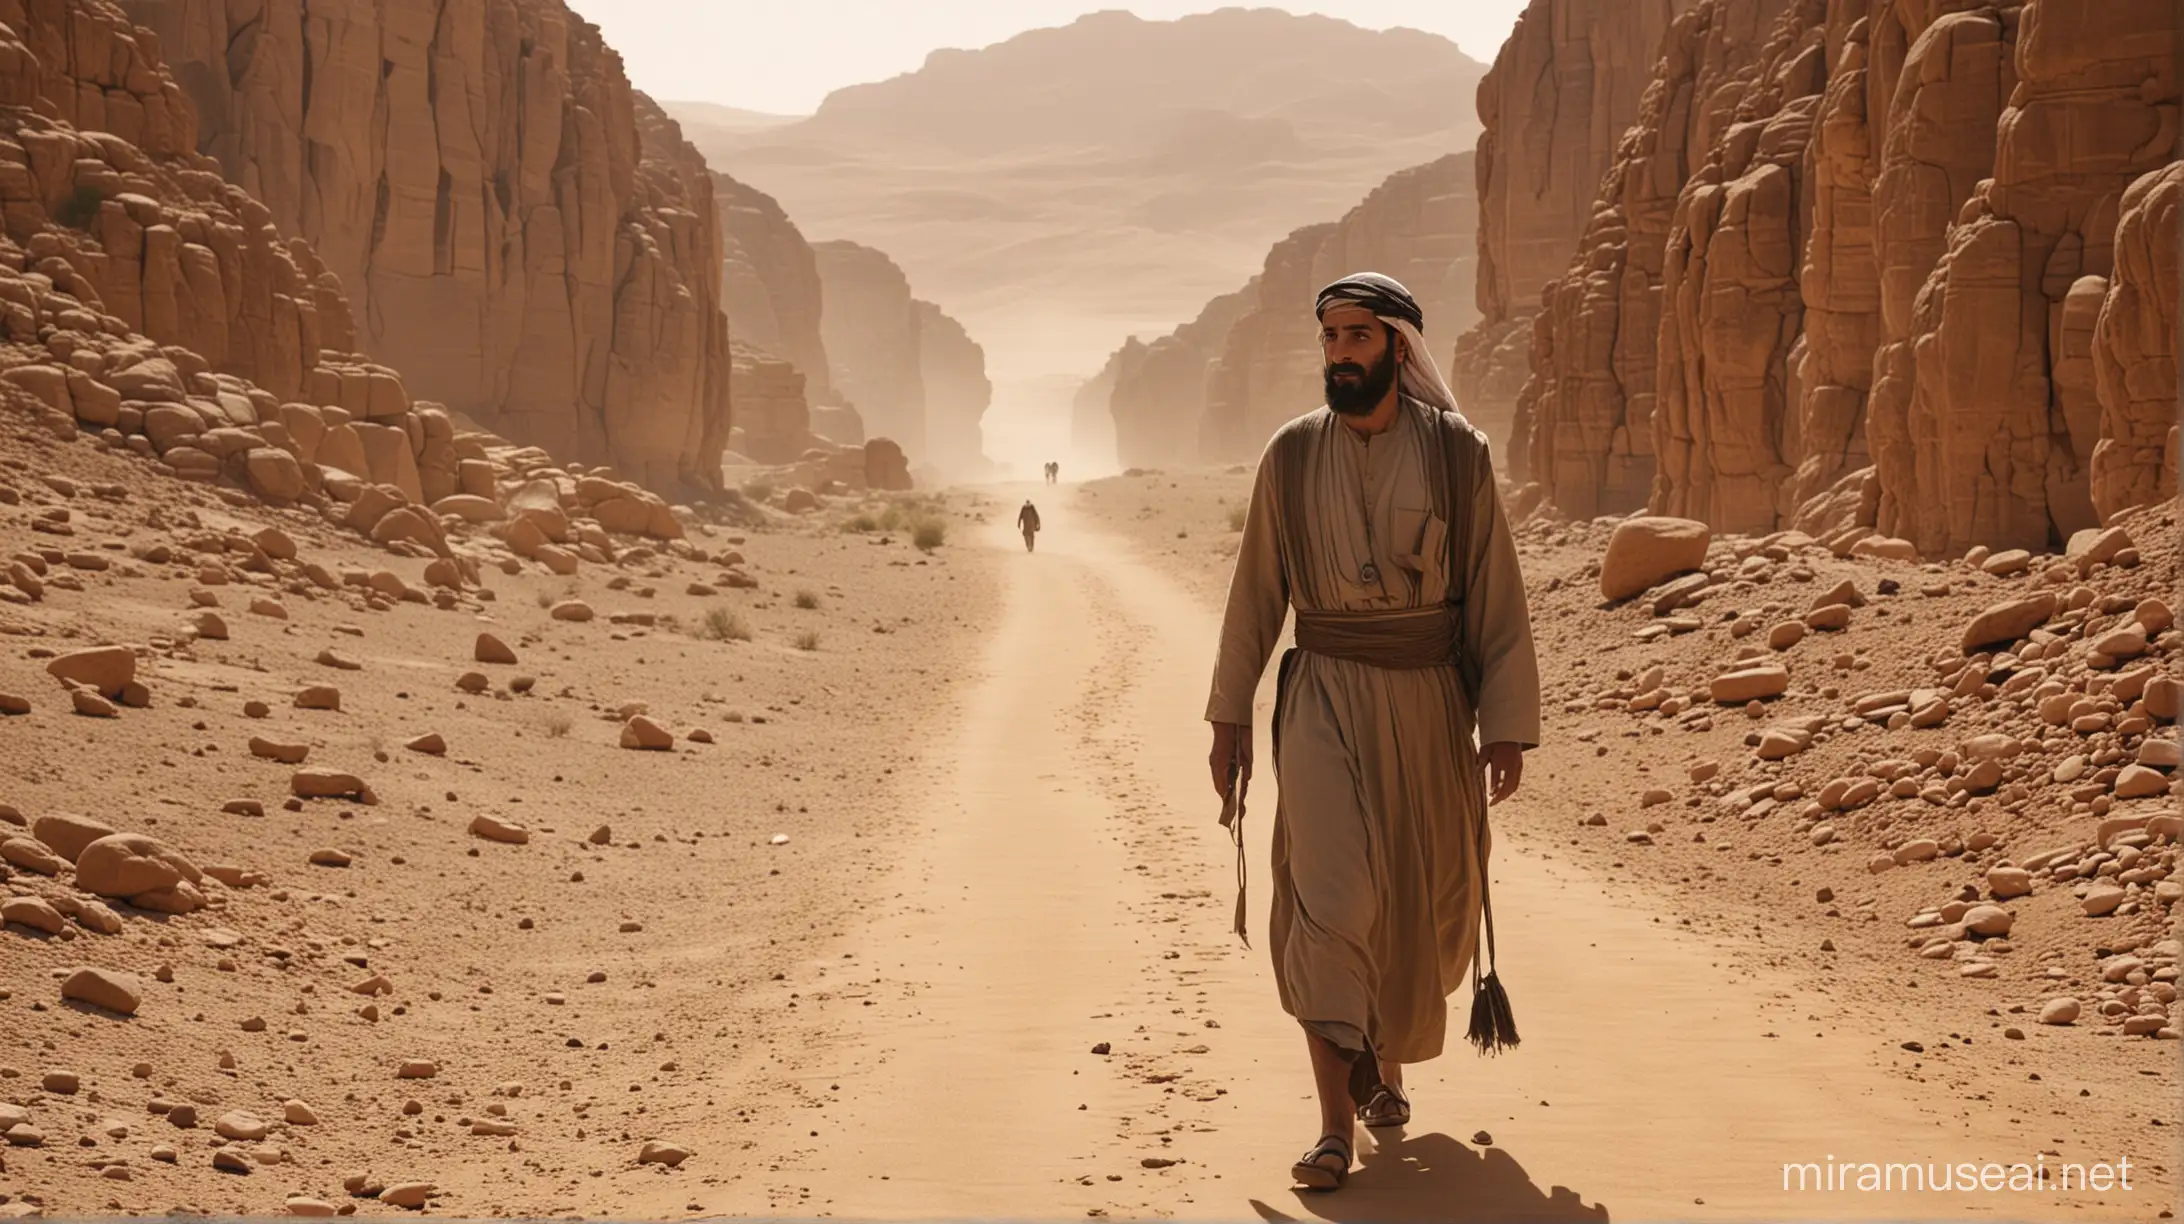  a close up of a  40 year old arab man walking alone down a desert track, set in the Era of moses